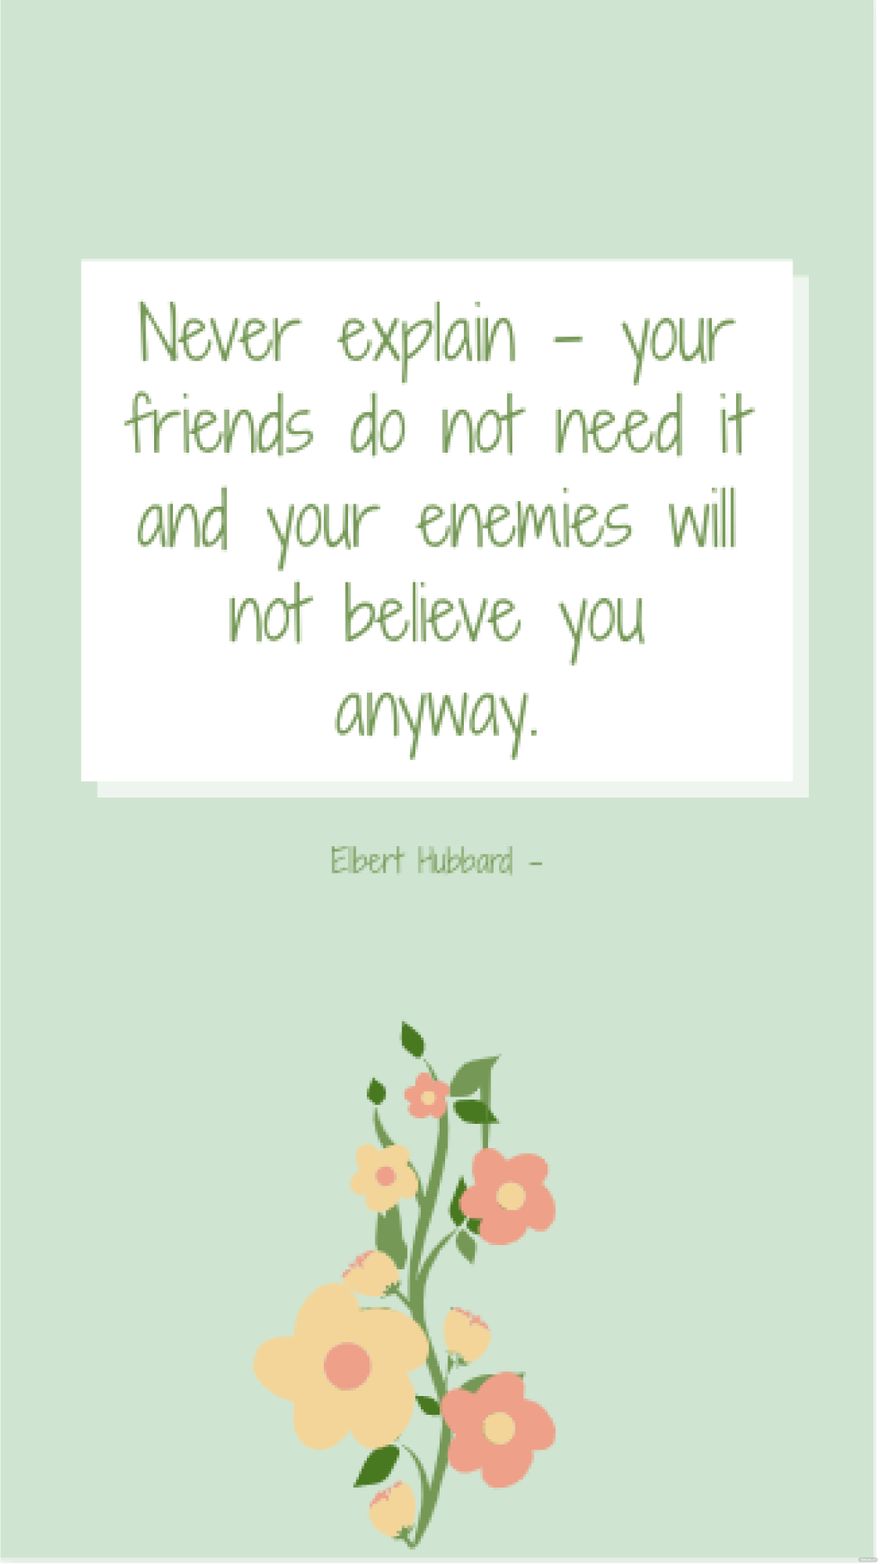 Elbert Hubbard - Never explain - your friends do not need it and your enemies will not believe you anyway.